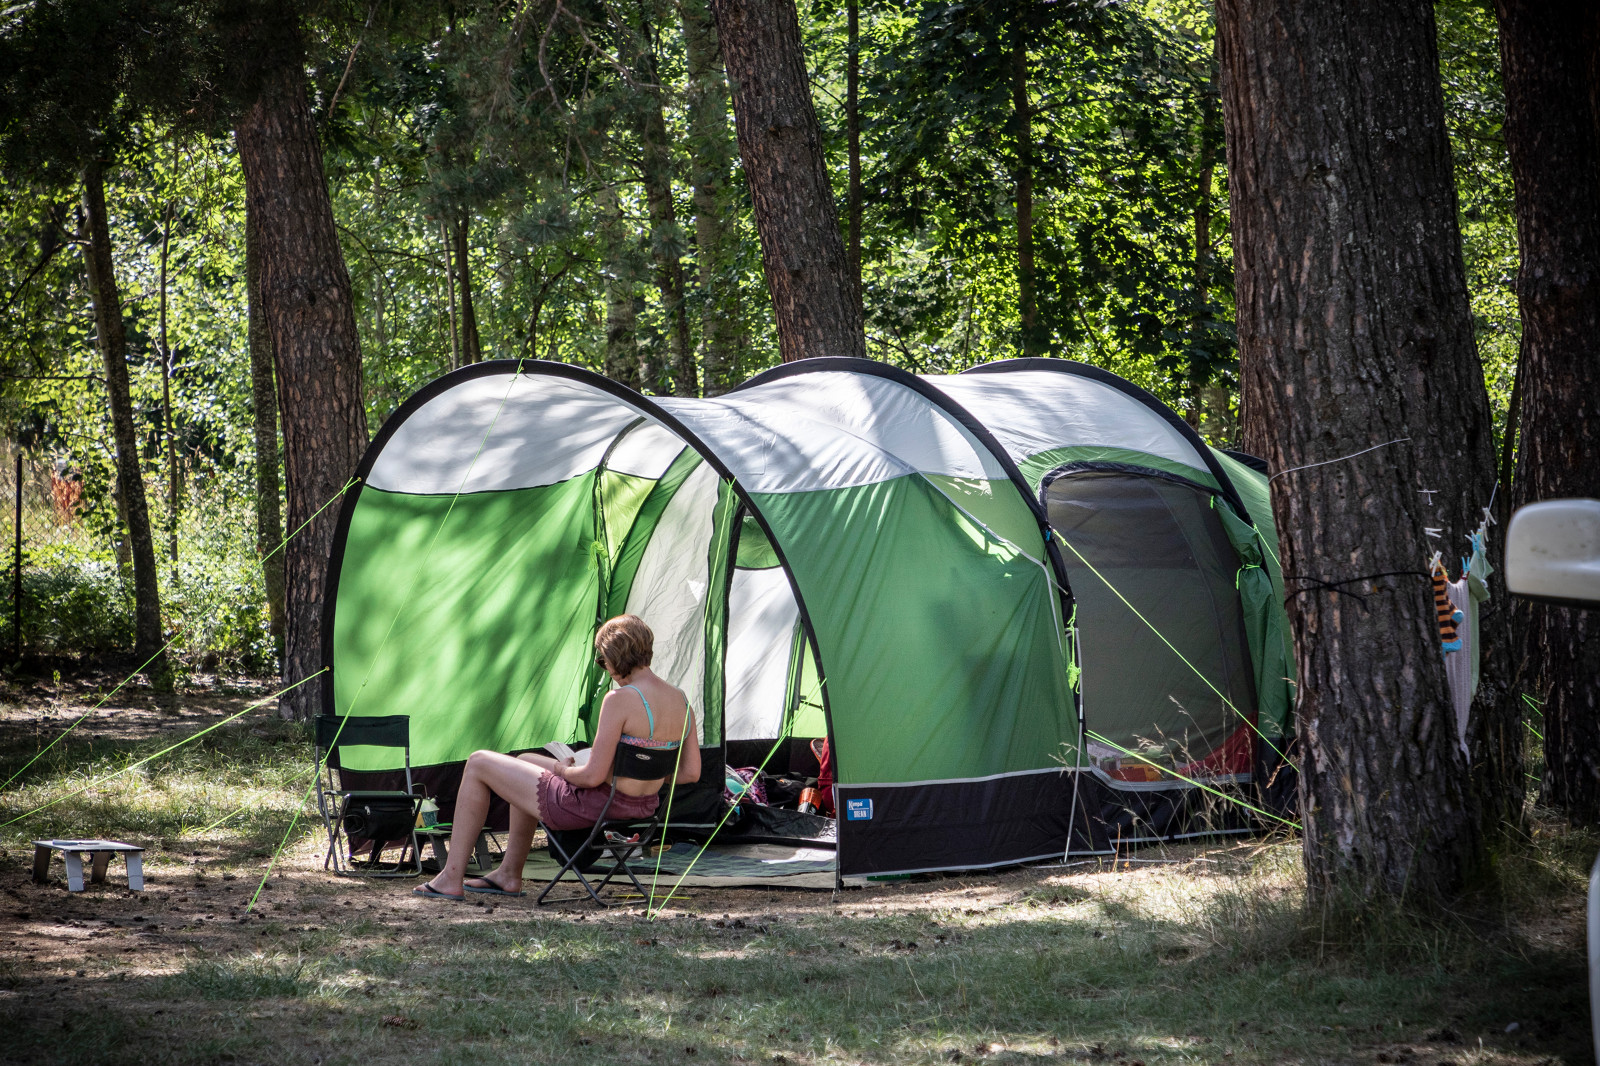 Pitch - Comfort Camping Pitch - Huttopia Bourg Saint-Maurice